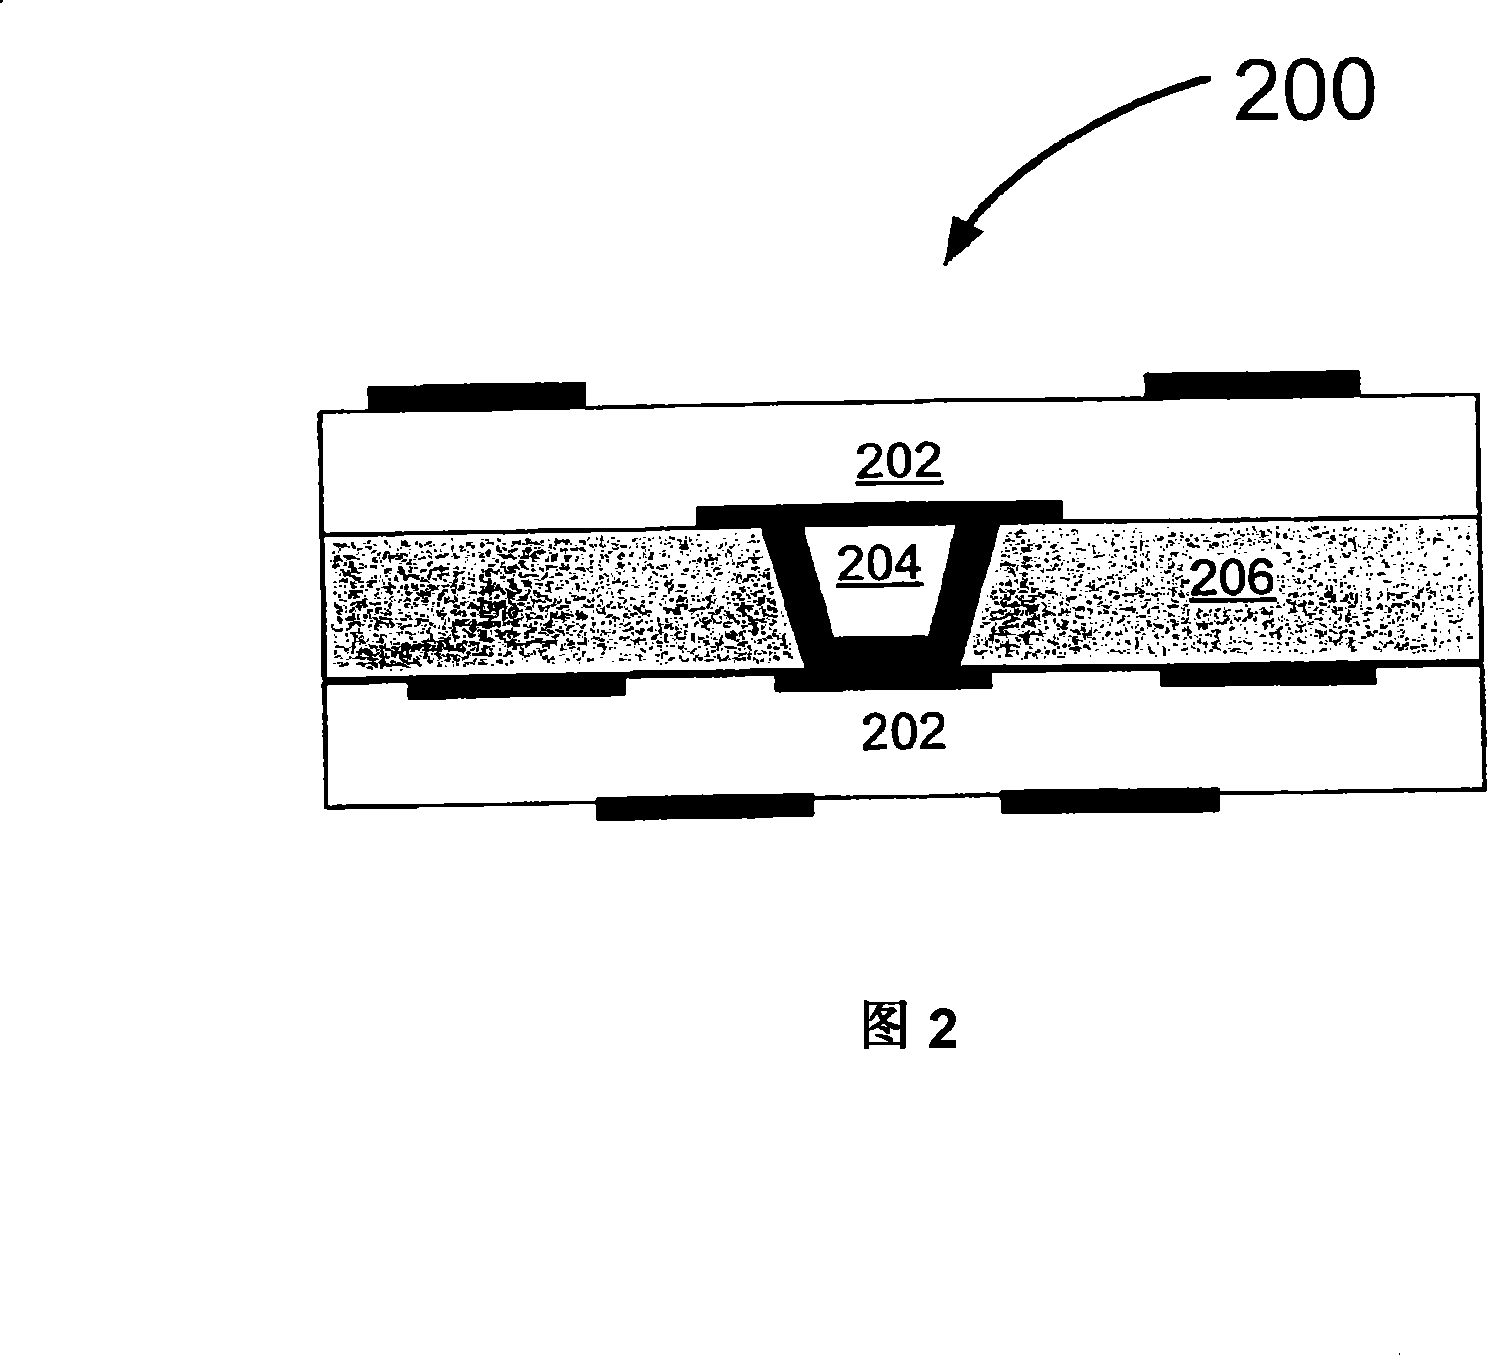 Embedded waveguide printed circuit board structure